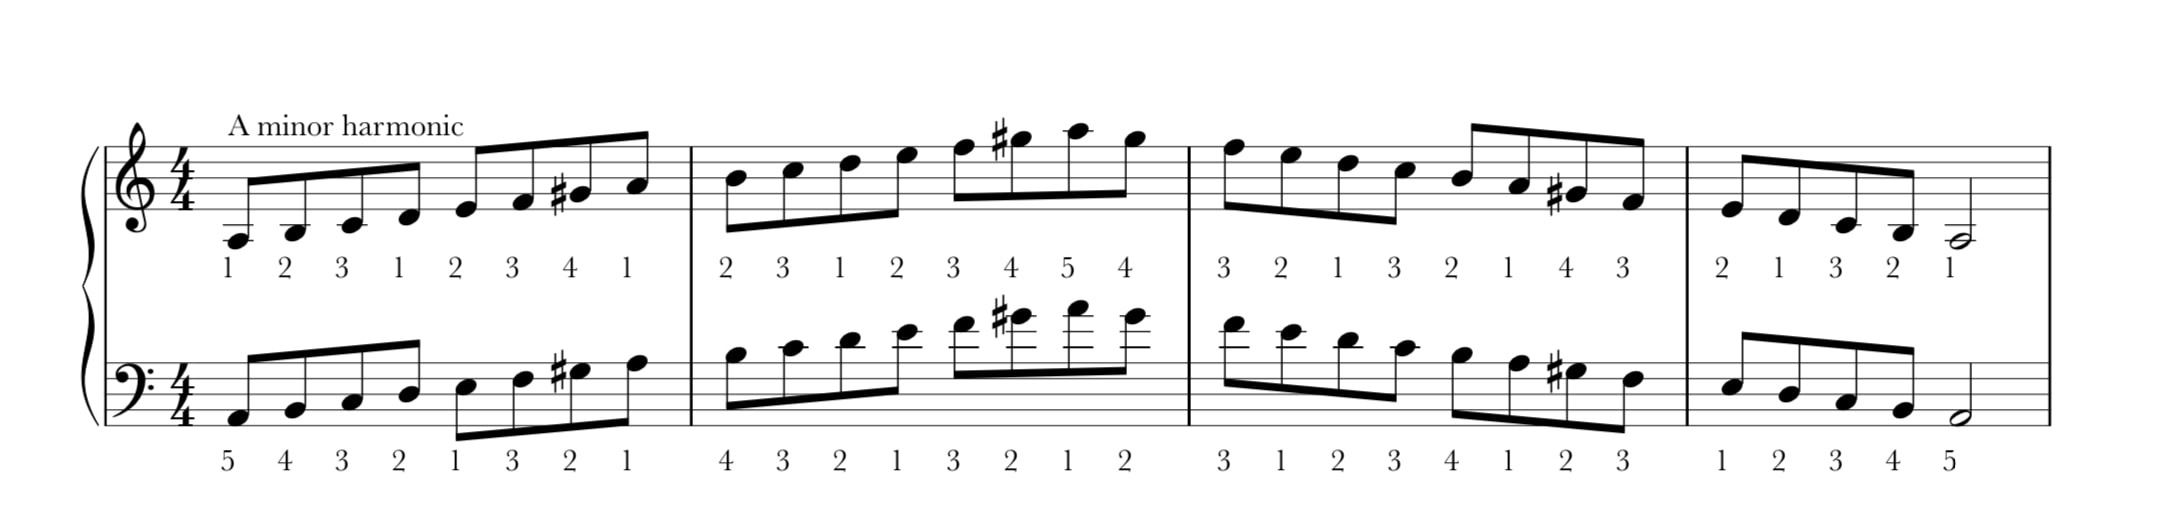 A harmonic minor scale two octaves